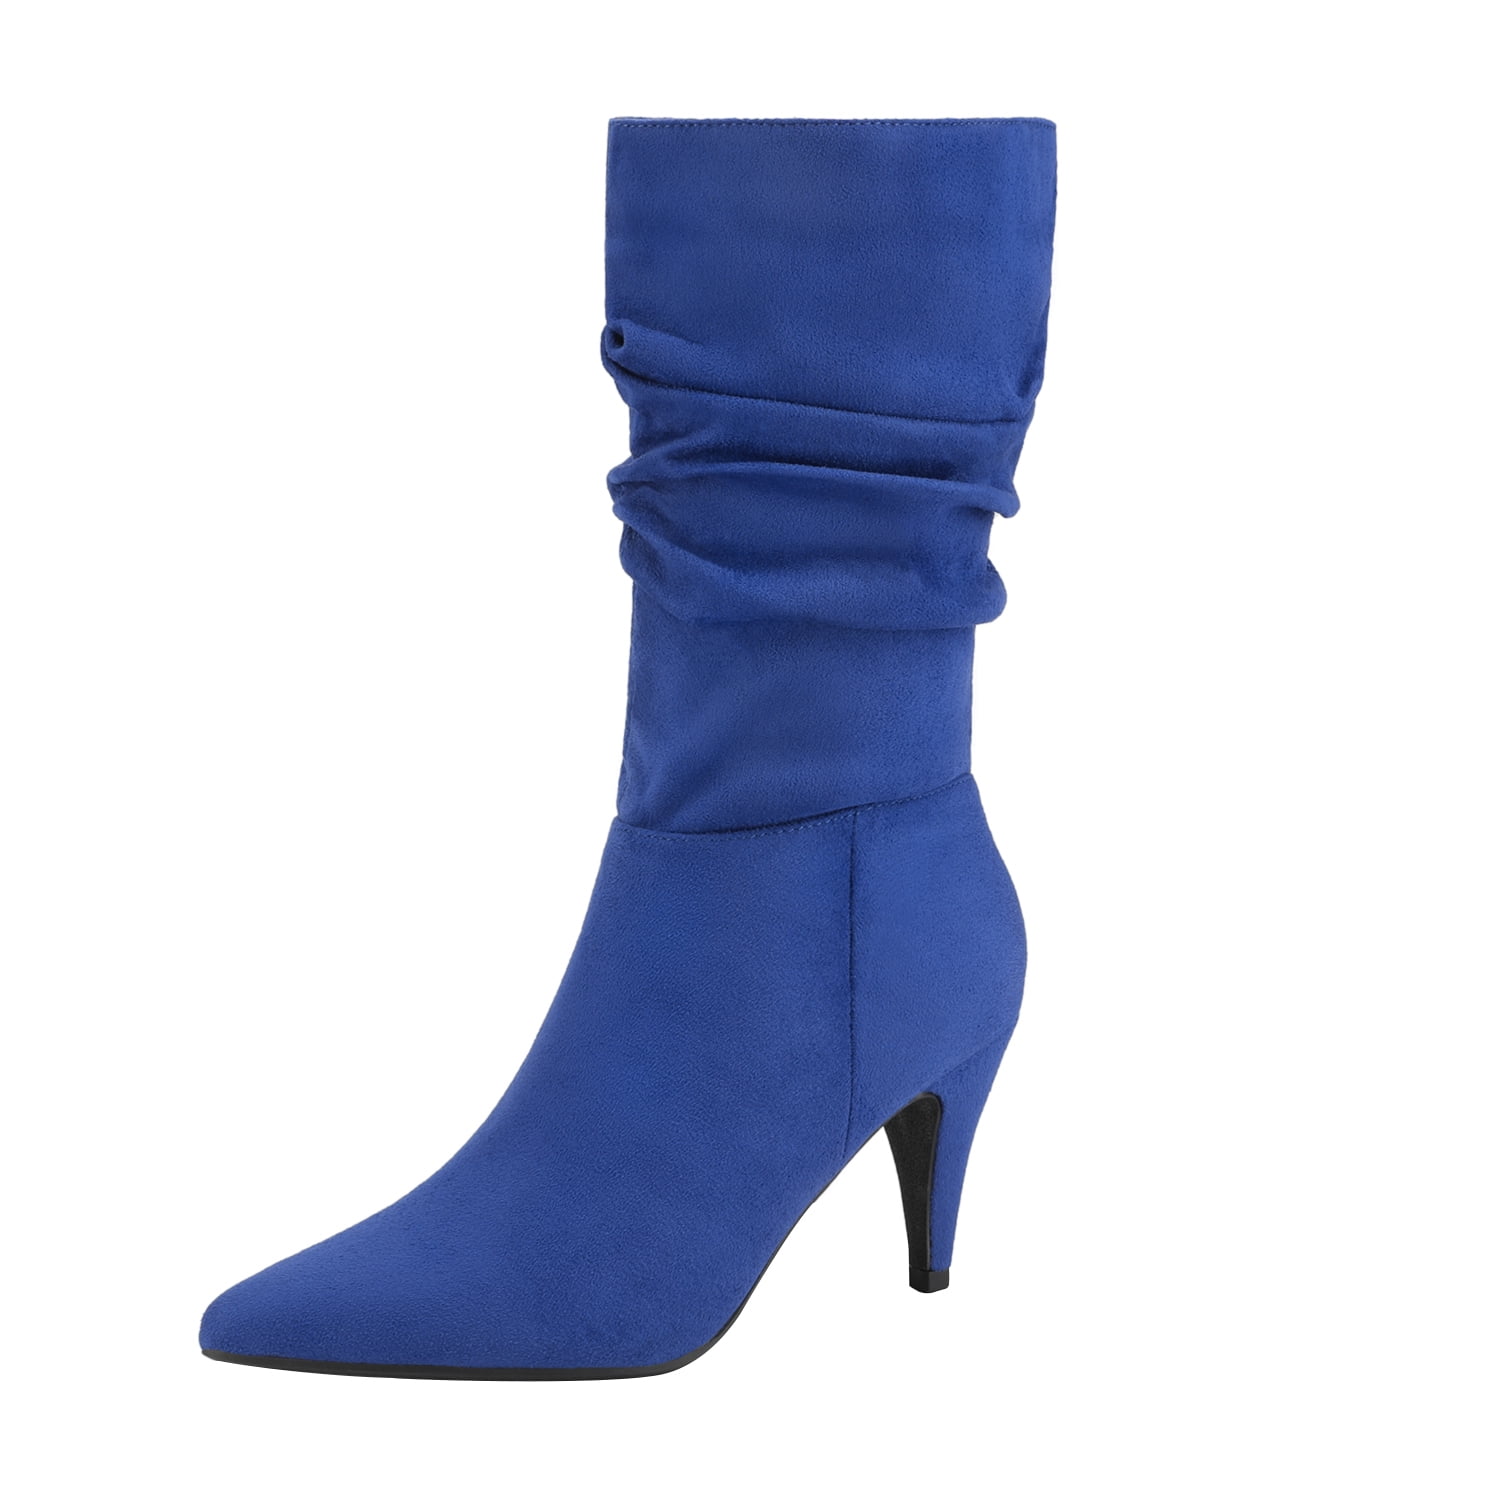 Dream Pairs Women's Fashion Pointed Toe Mid Calf Boots Stiletto High Heel  Slouch Zipper Boots KIMLY ROYAL/BLUE/SUEDE Size 6